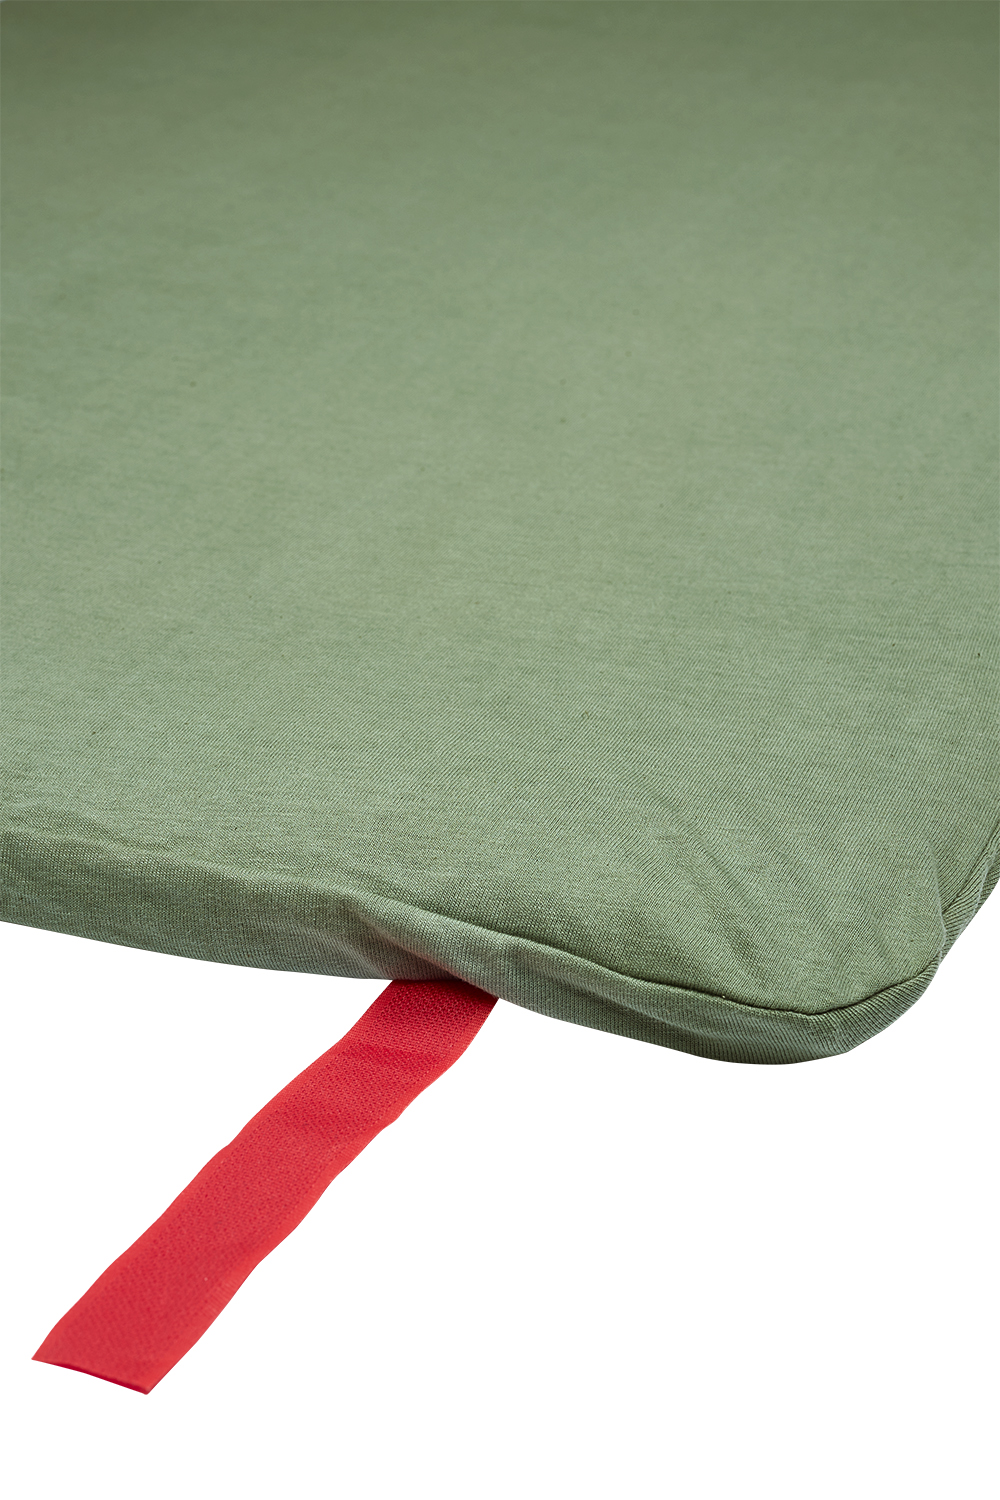 Jersey Campingbed Matrashoes DeLuxe - Forest Green - 60x120cm 